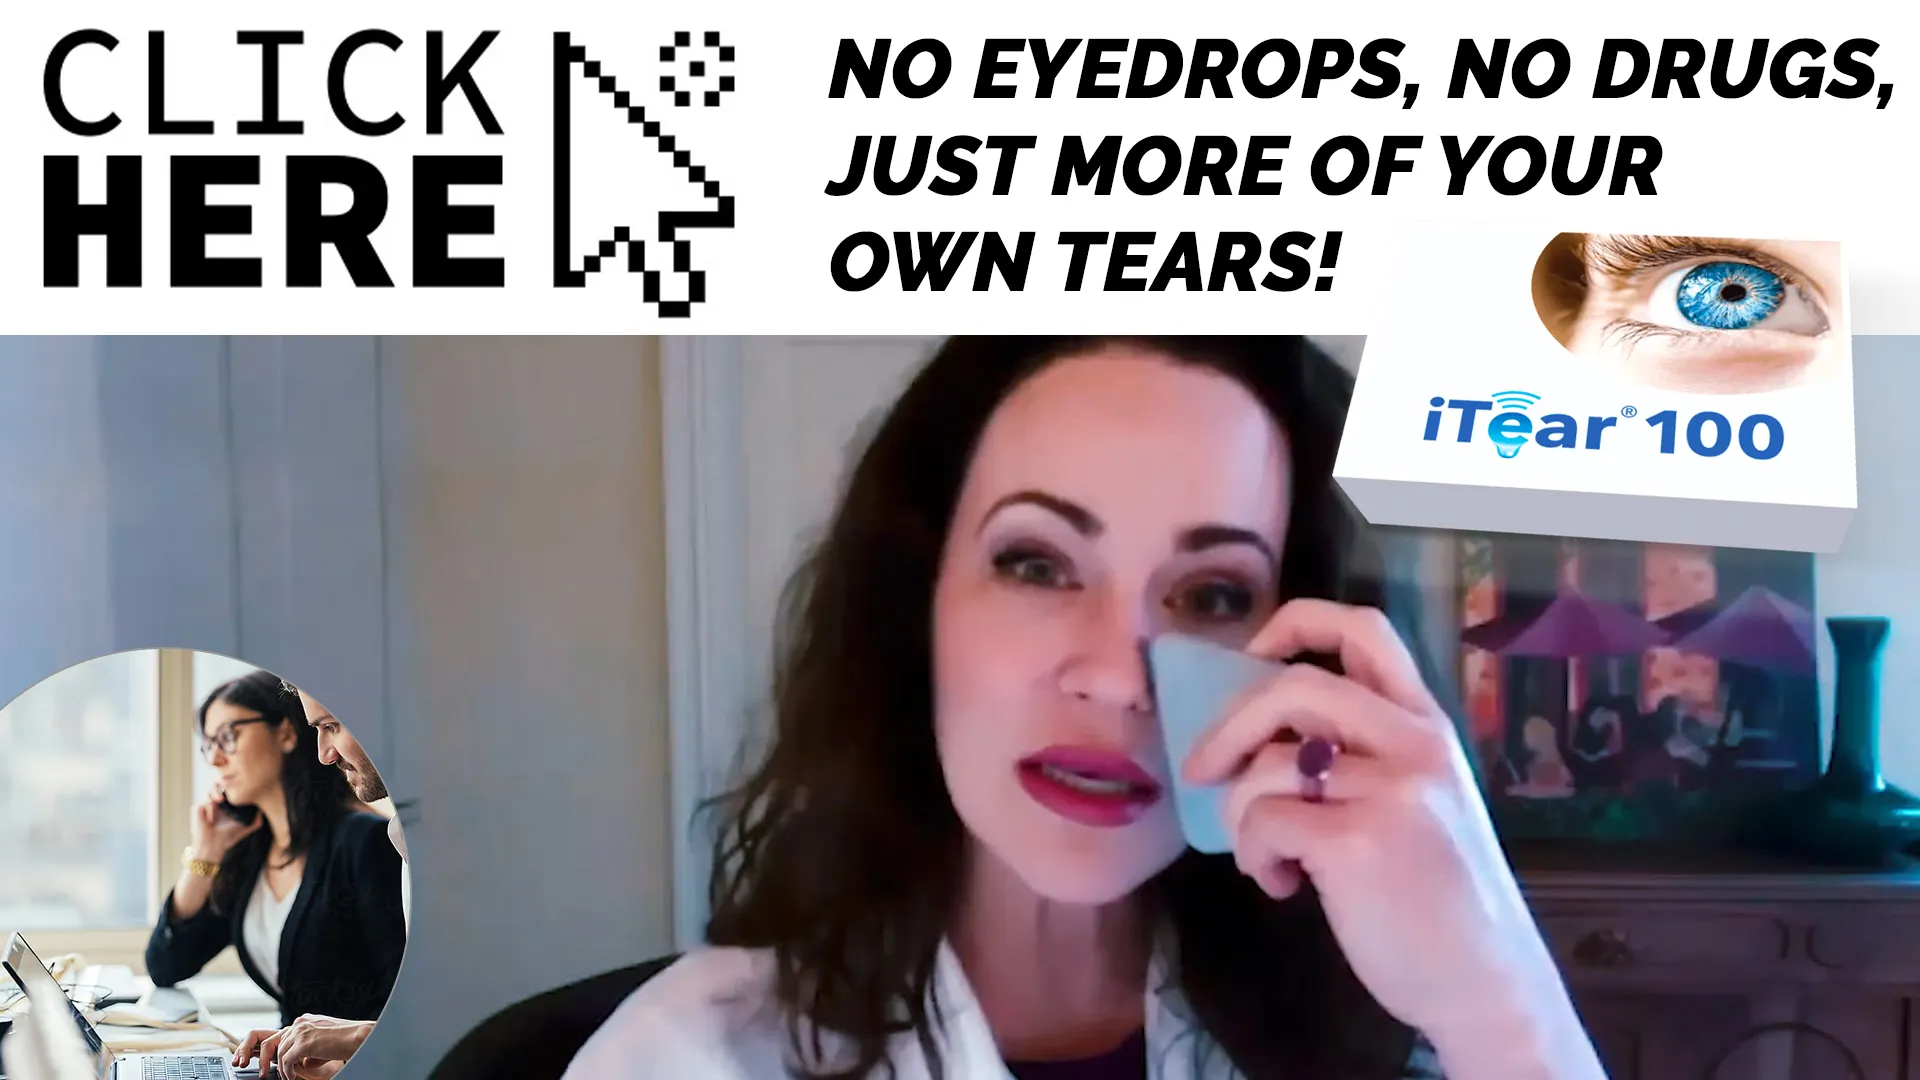 A Comparison of iTear100 and Traditional Eye Drops